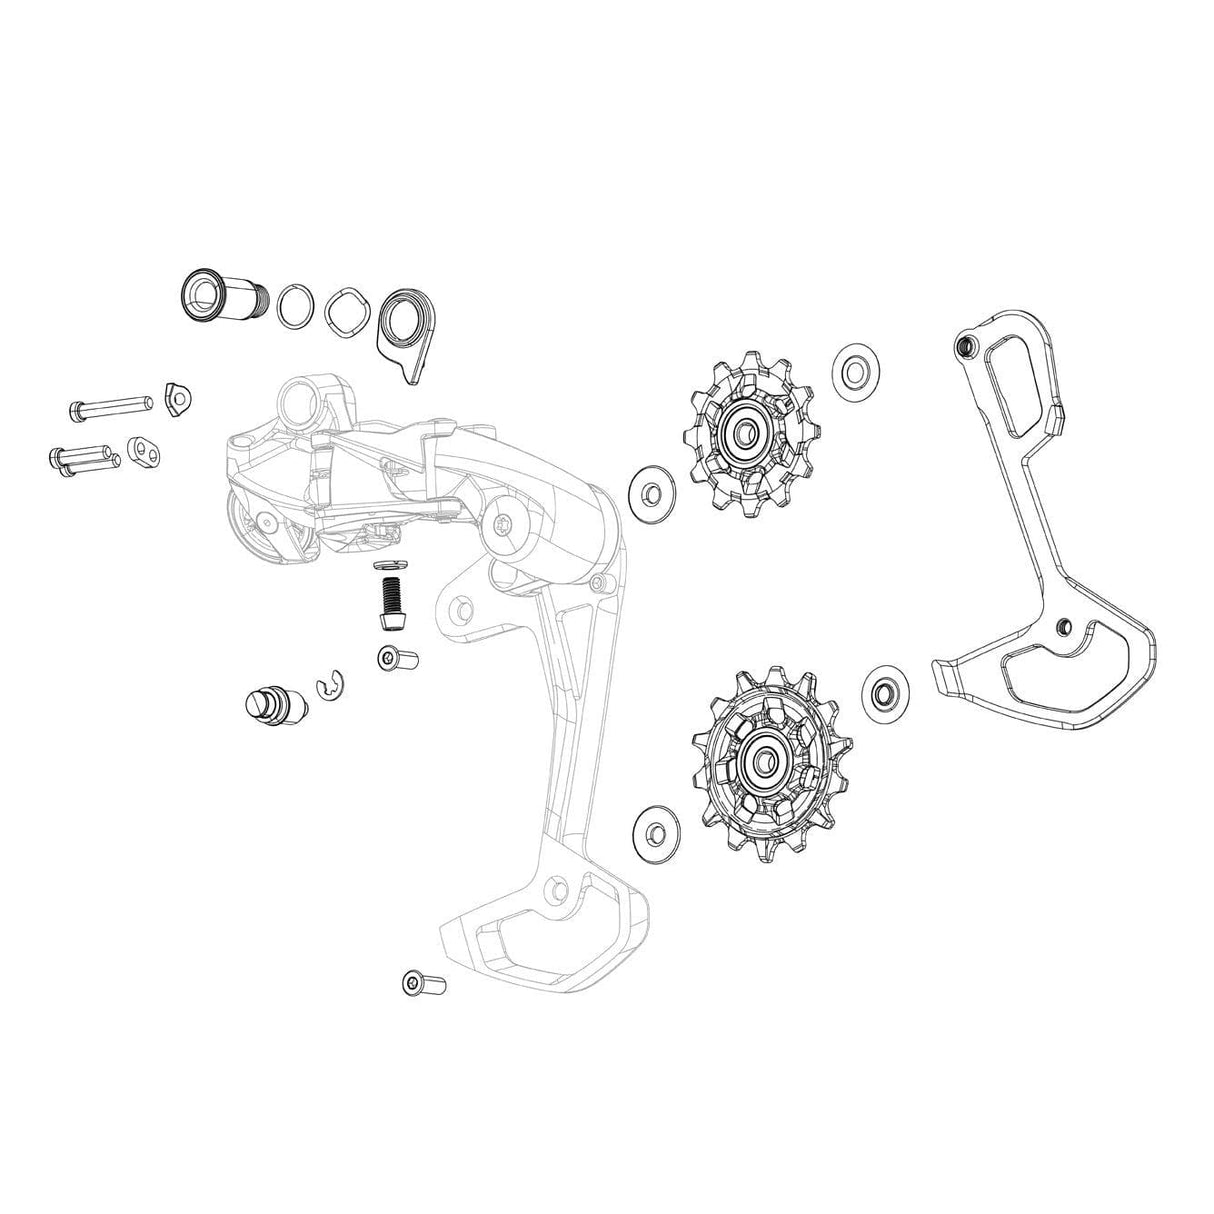 Sram Spare - Rear Derailleur Pulley Kit Rival Etap Axs Steel Bearing (Includes 12T Upper And 12T Lower Pulleys, 18.5Mm And 12.9Mm Steel Pulley Screws):